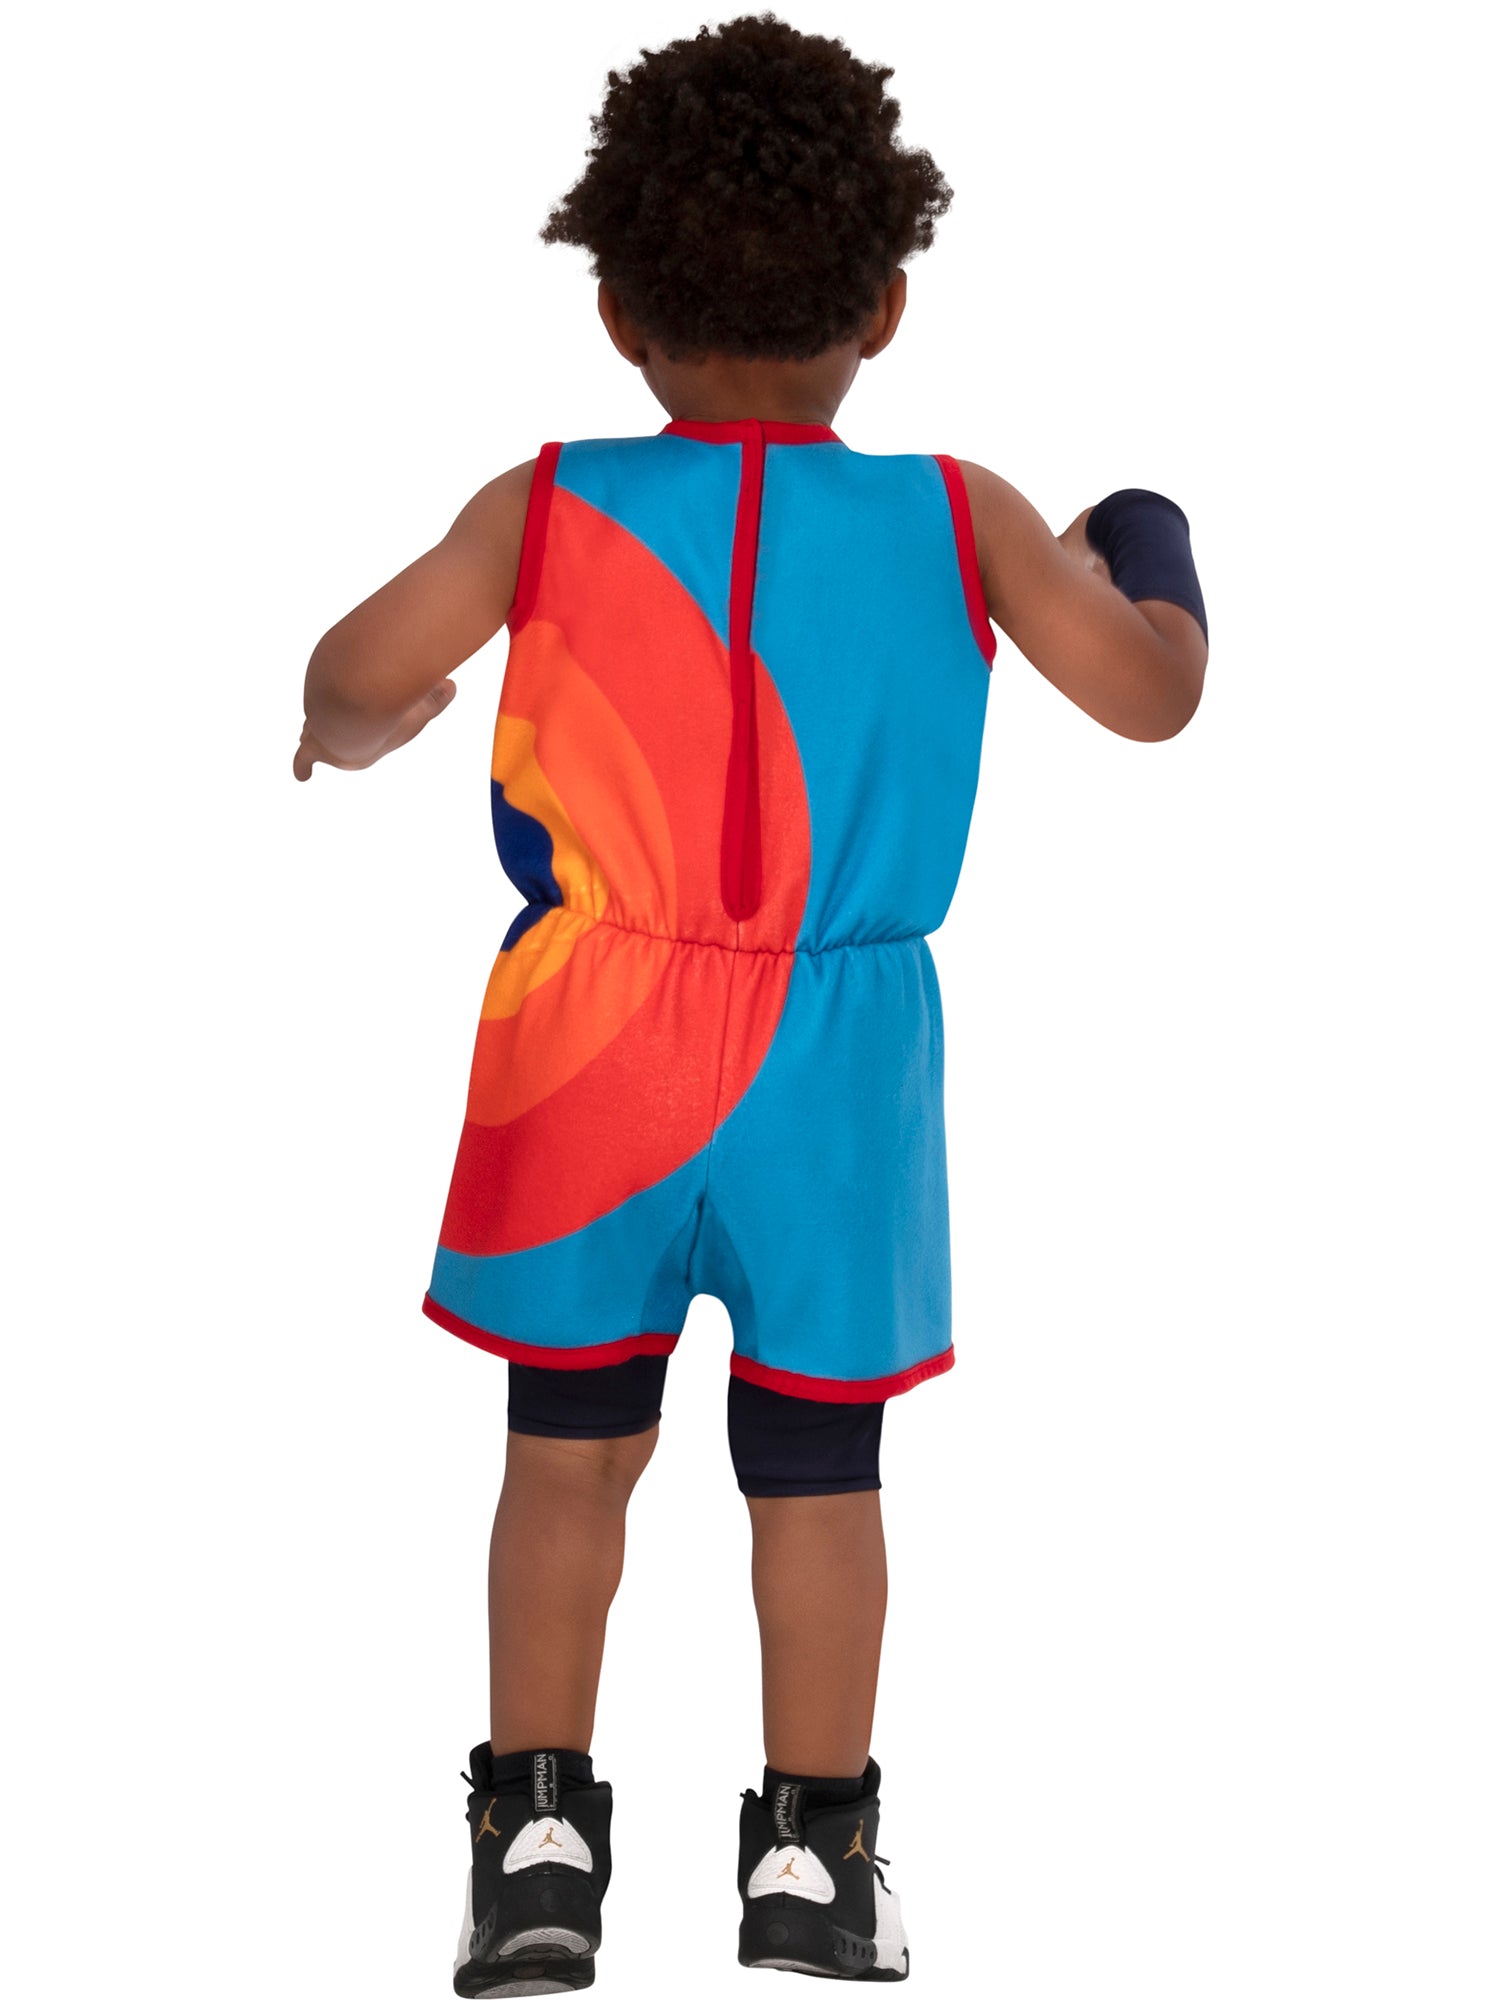 Baby/Toddler Space Jam Lebron James Costume - costumes.com